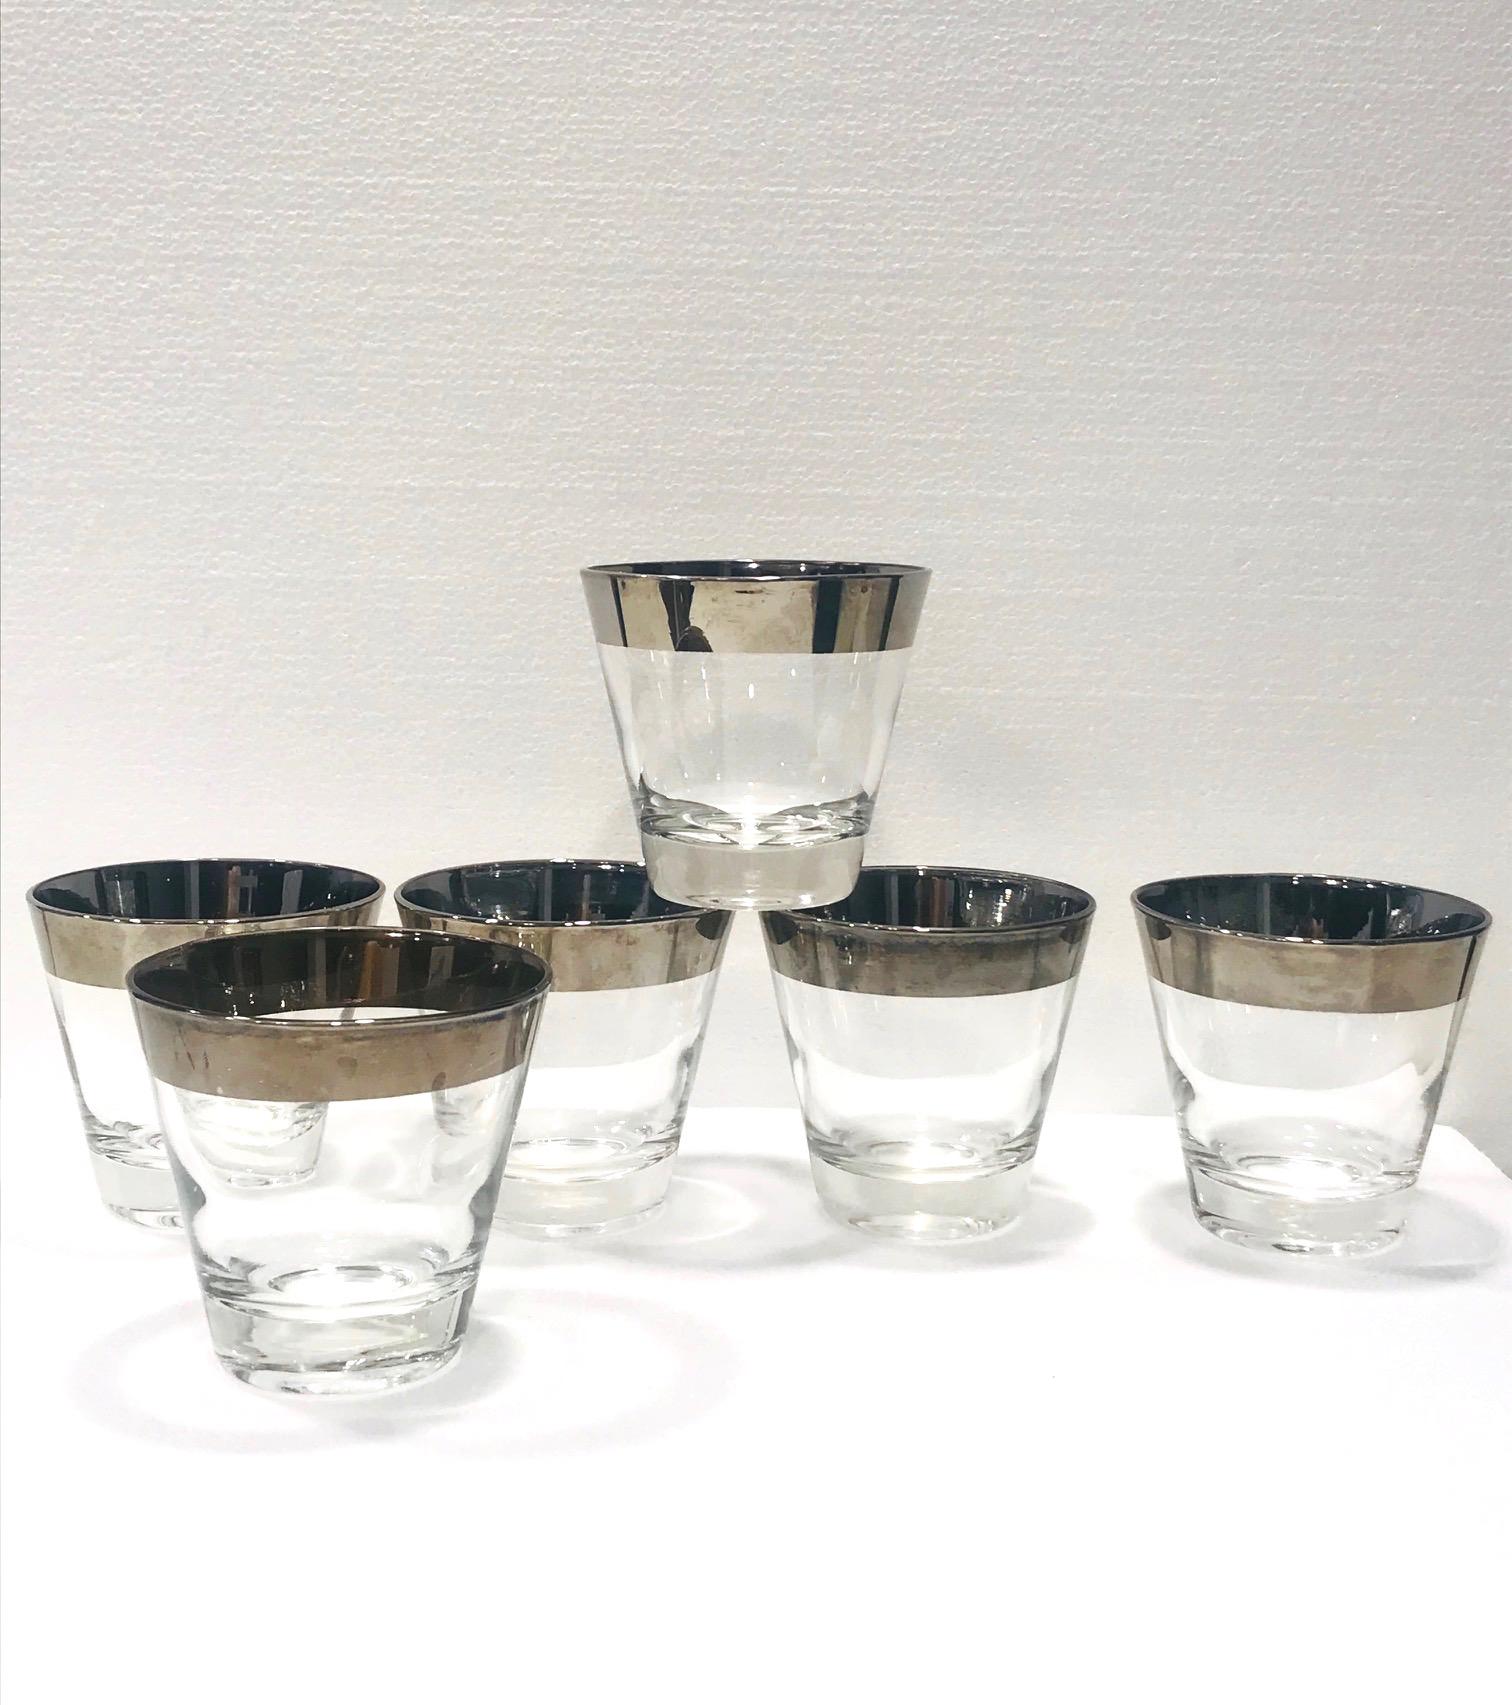 Iconic Mid-Century Modern cocktail glasses by Dorothy Thorpe. Set includes six rock glasses with tapered design and with silver overlay rim. Makes a chic and timeless addition to any bar set. Washing by hand is best in order to preserve the silver